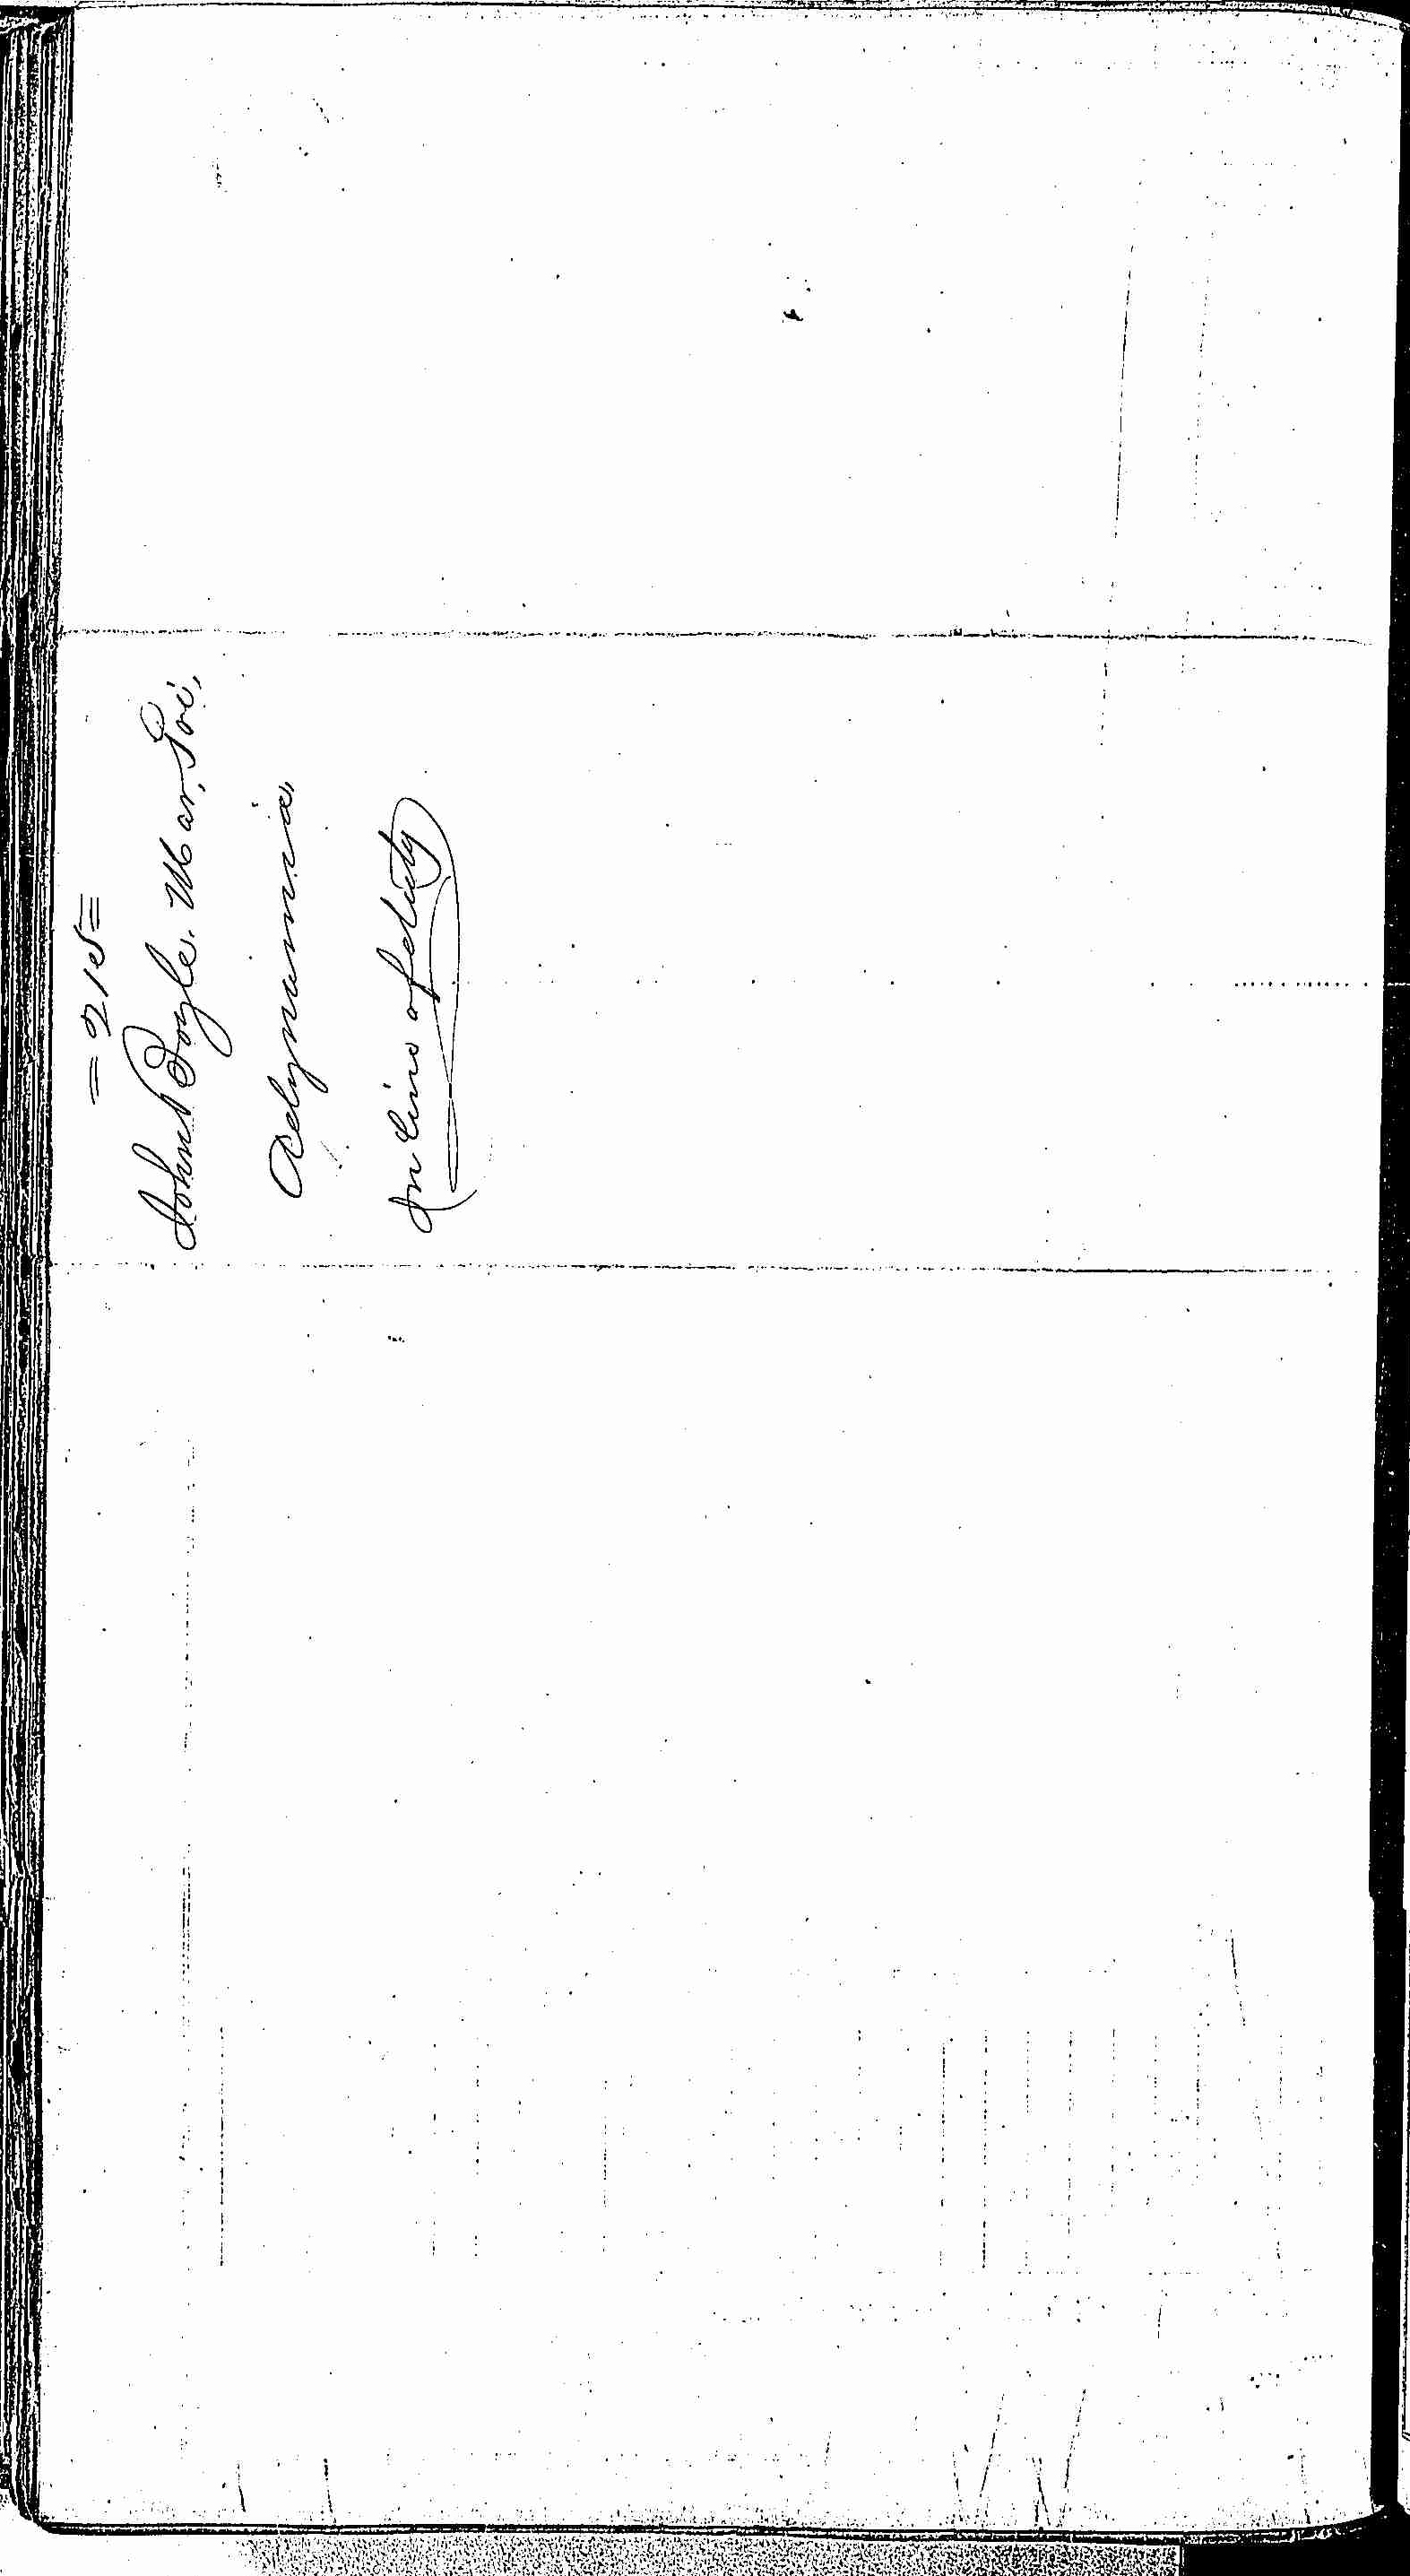 Entry for John Boyle (page 2 of 2) in the log Hospital Tickets and Case Papers - Naval Hospital - Washington, D.C. - 1866-68